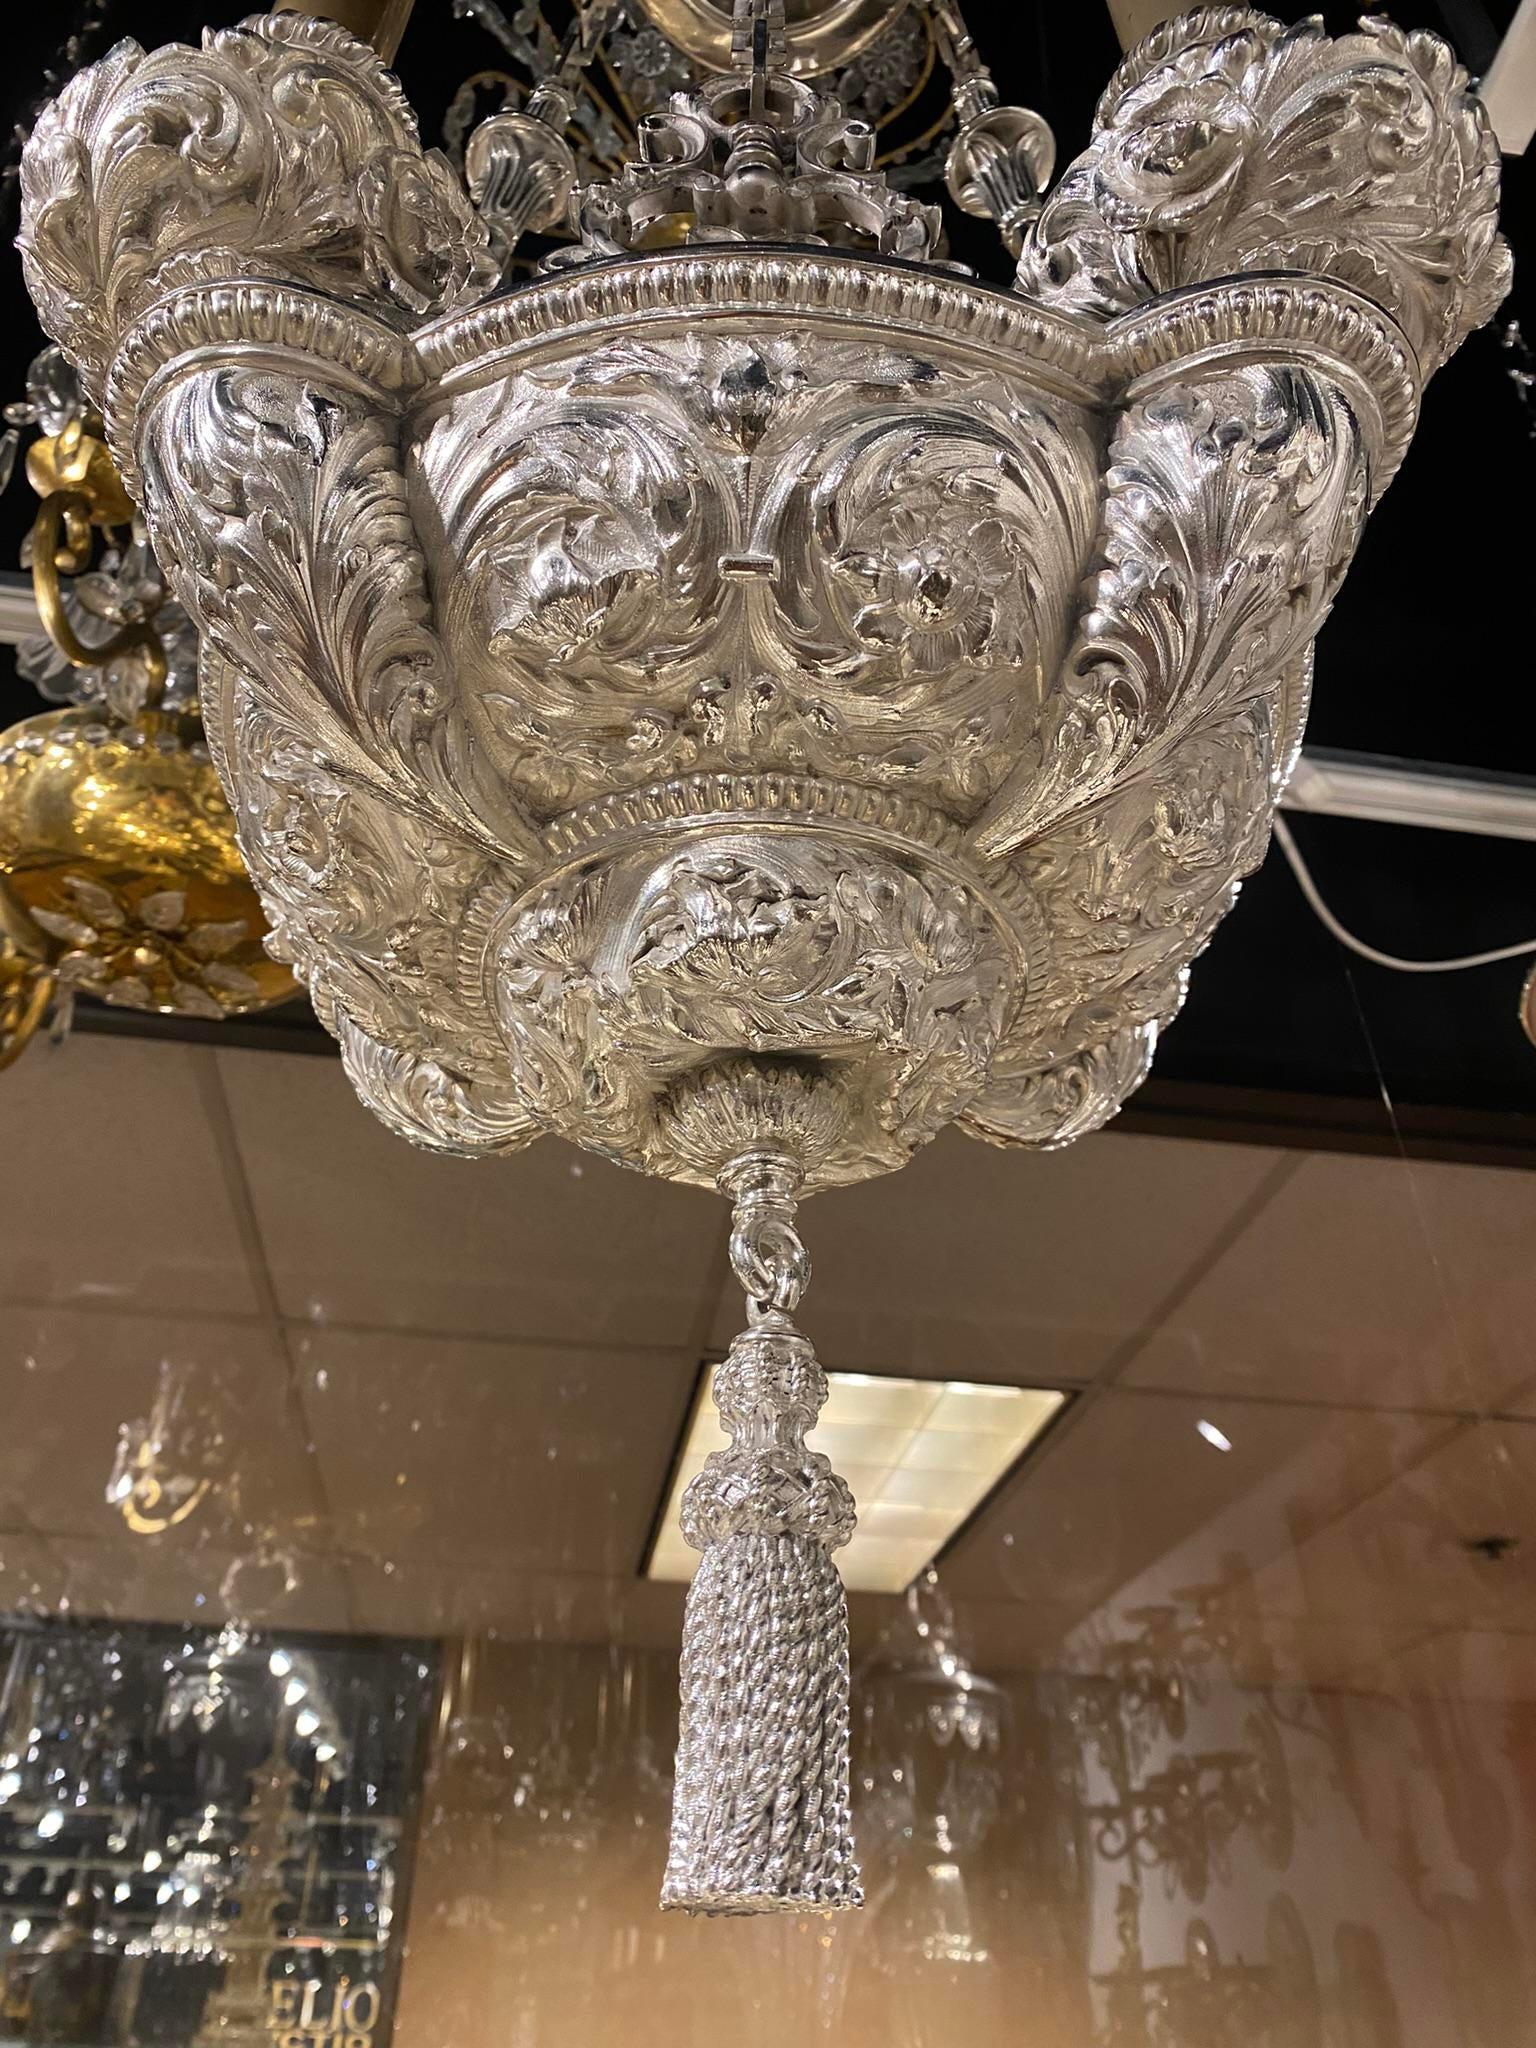 A Caldwell chandelier with 4 lights and a very unusual design, circa 1900. In very good vintage condition.

Dealer: G302YP